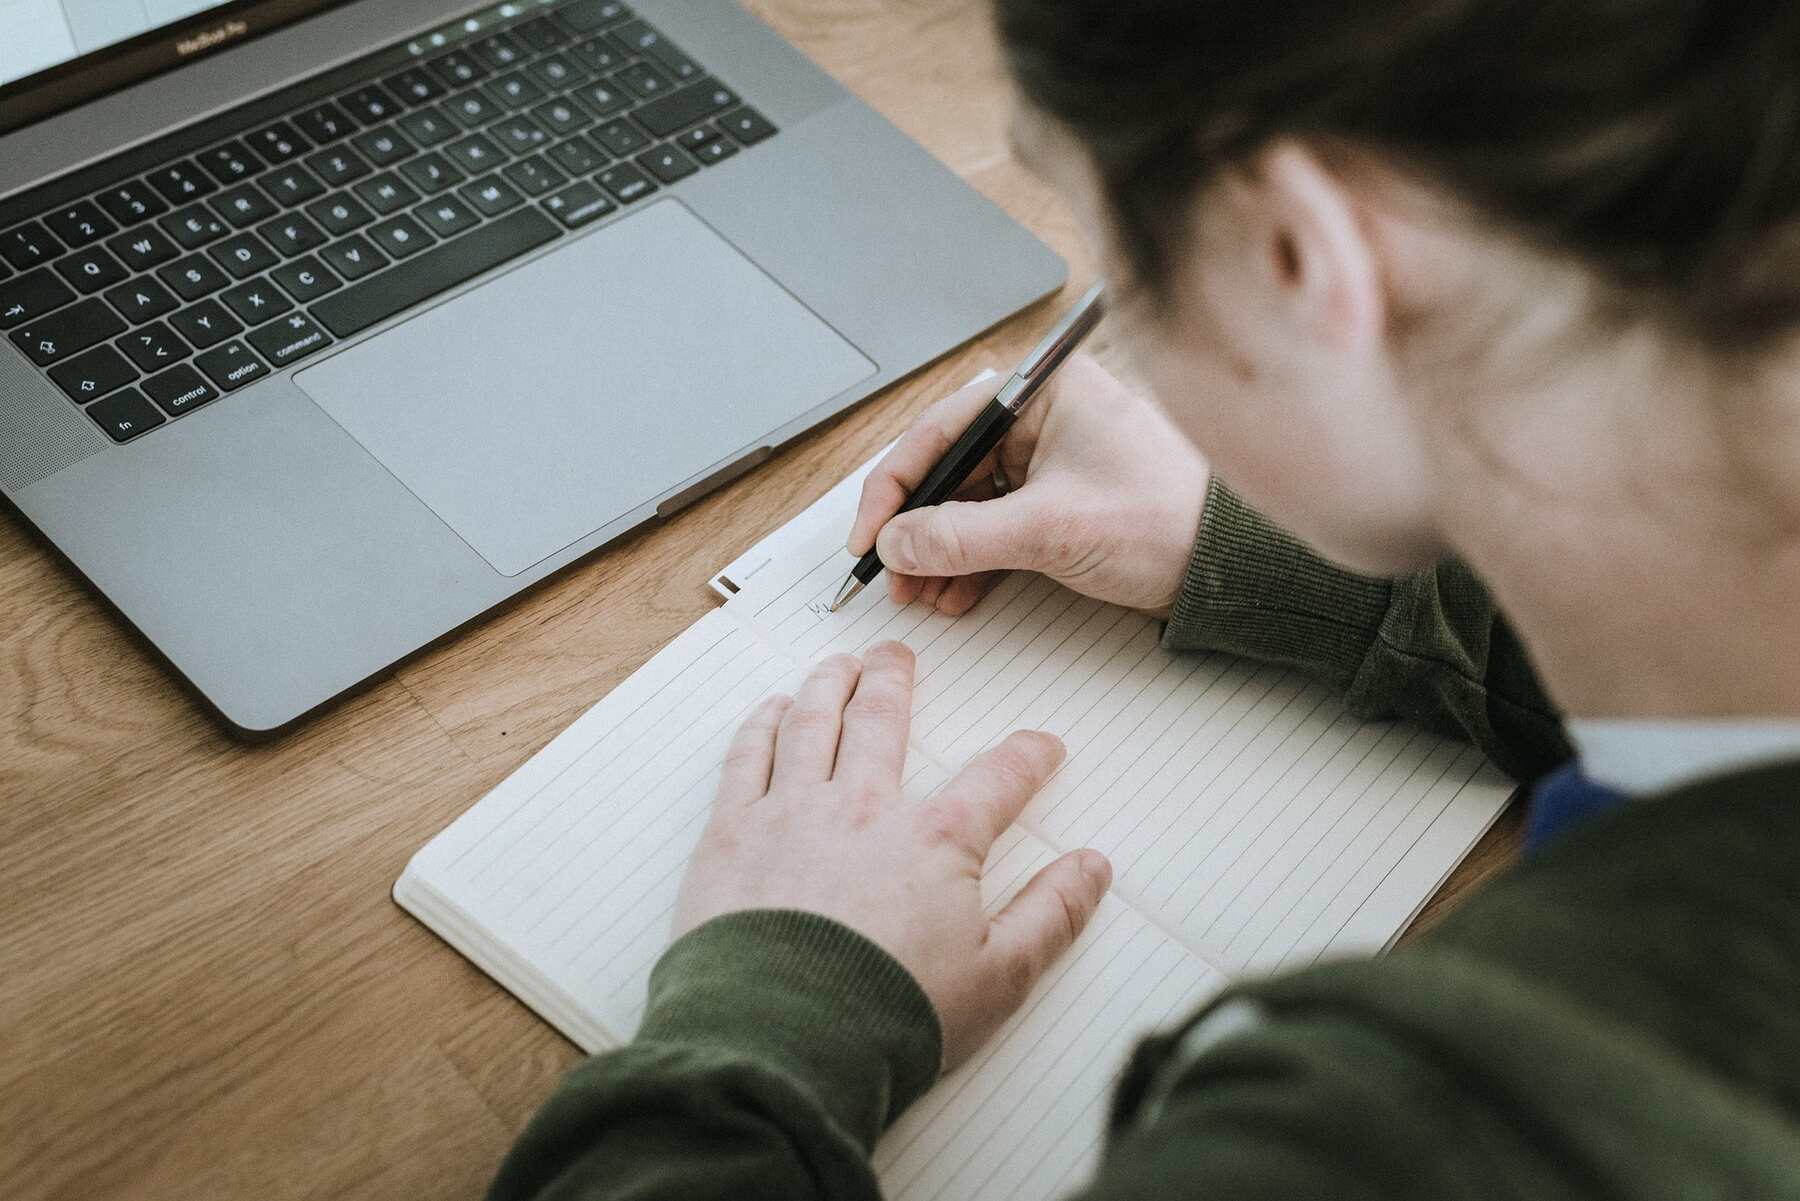 Woman writing notes while her laptop is in front of her